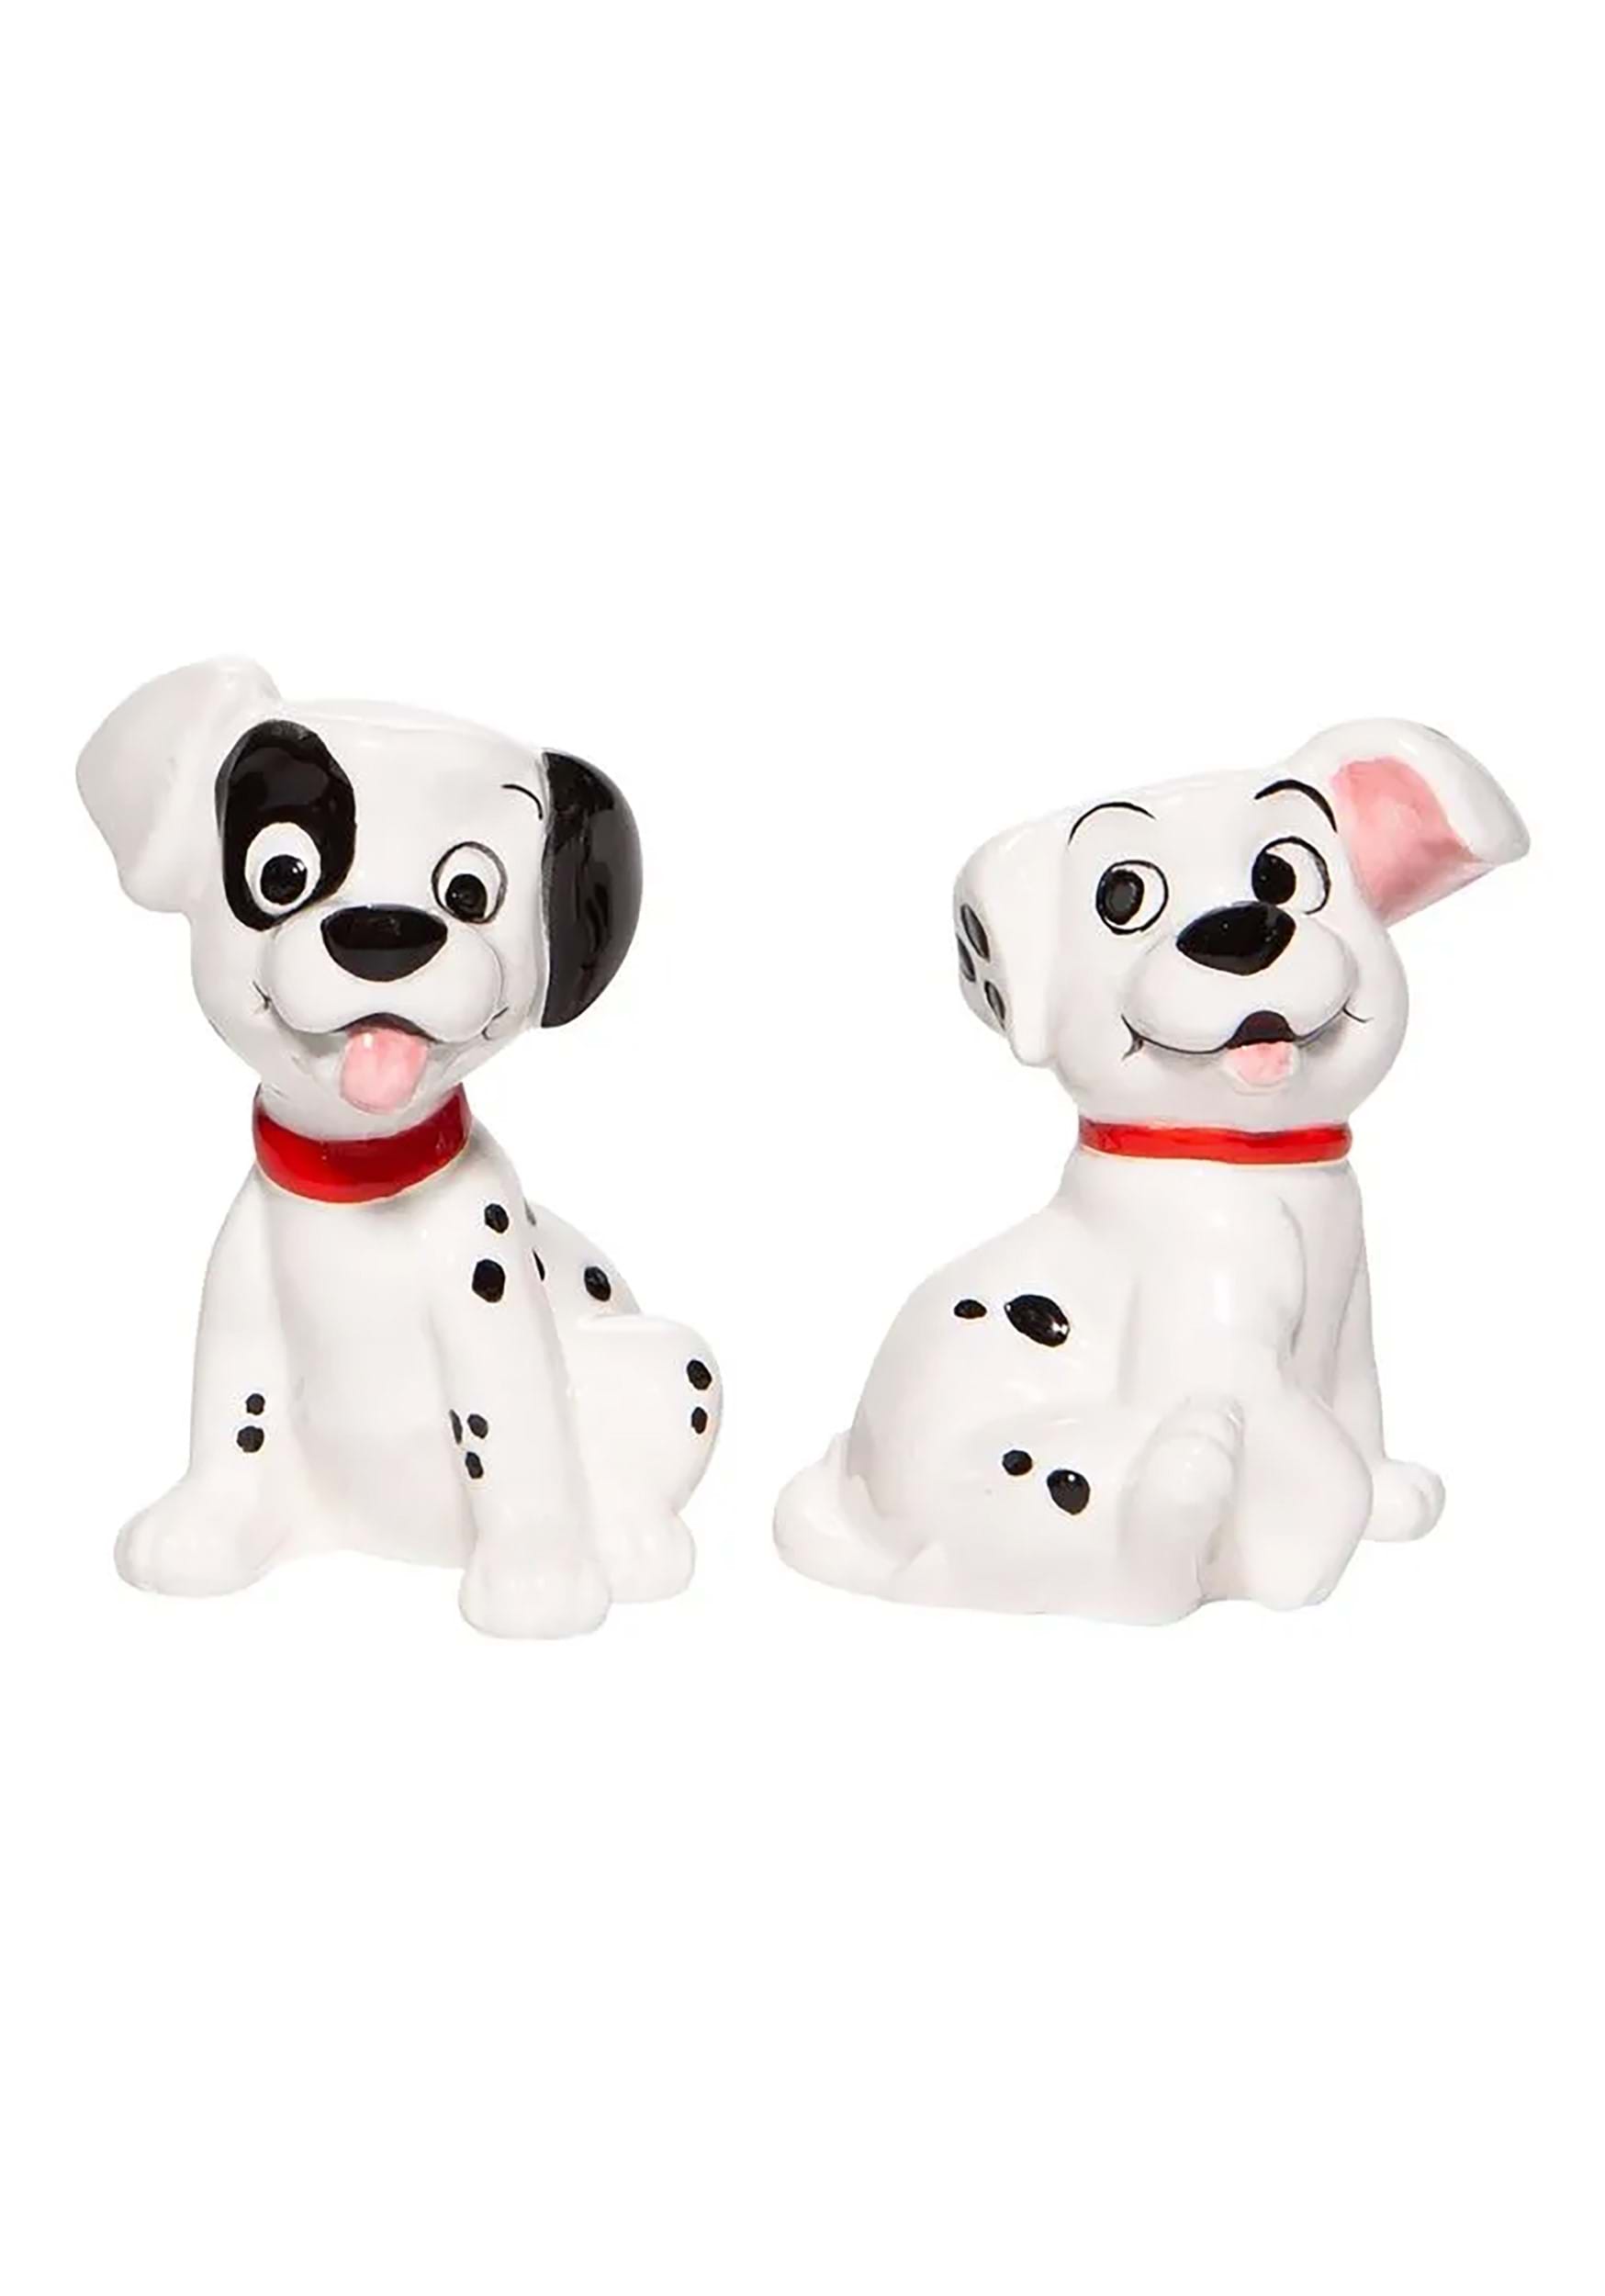 101 Dalmations Patch and Rolly Salt and Pepper Shakers